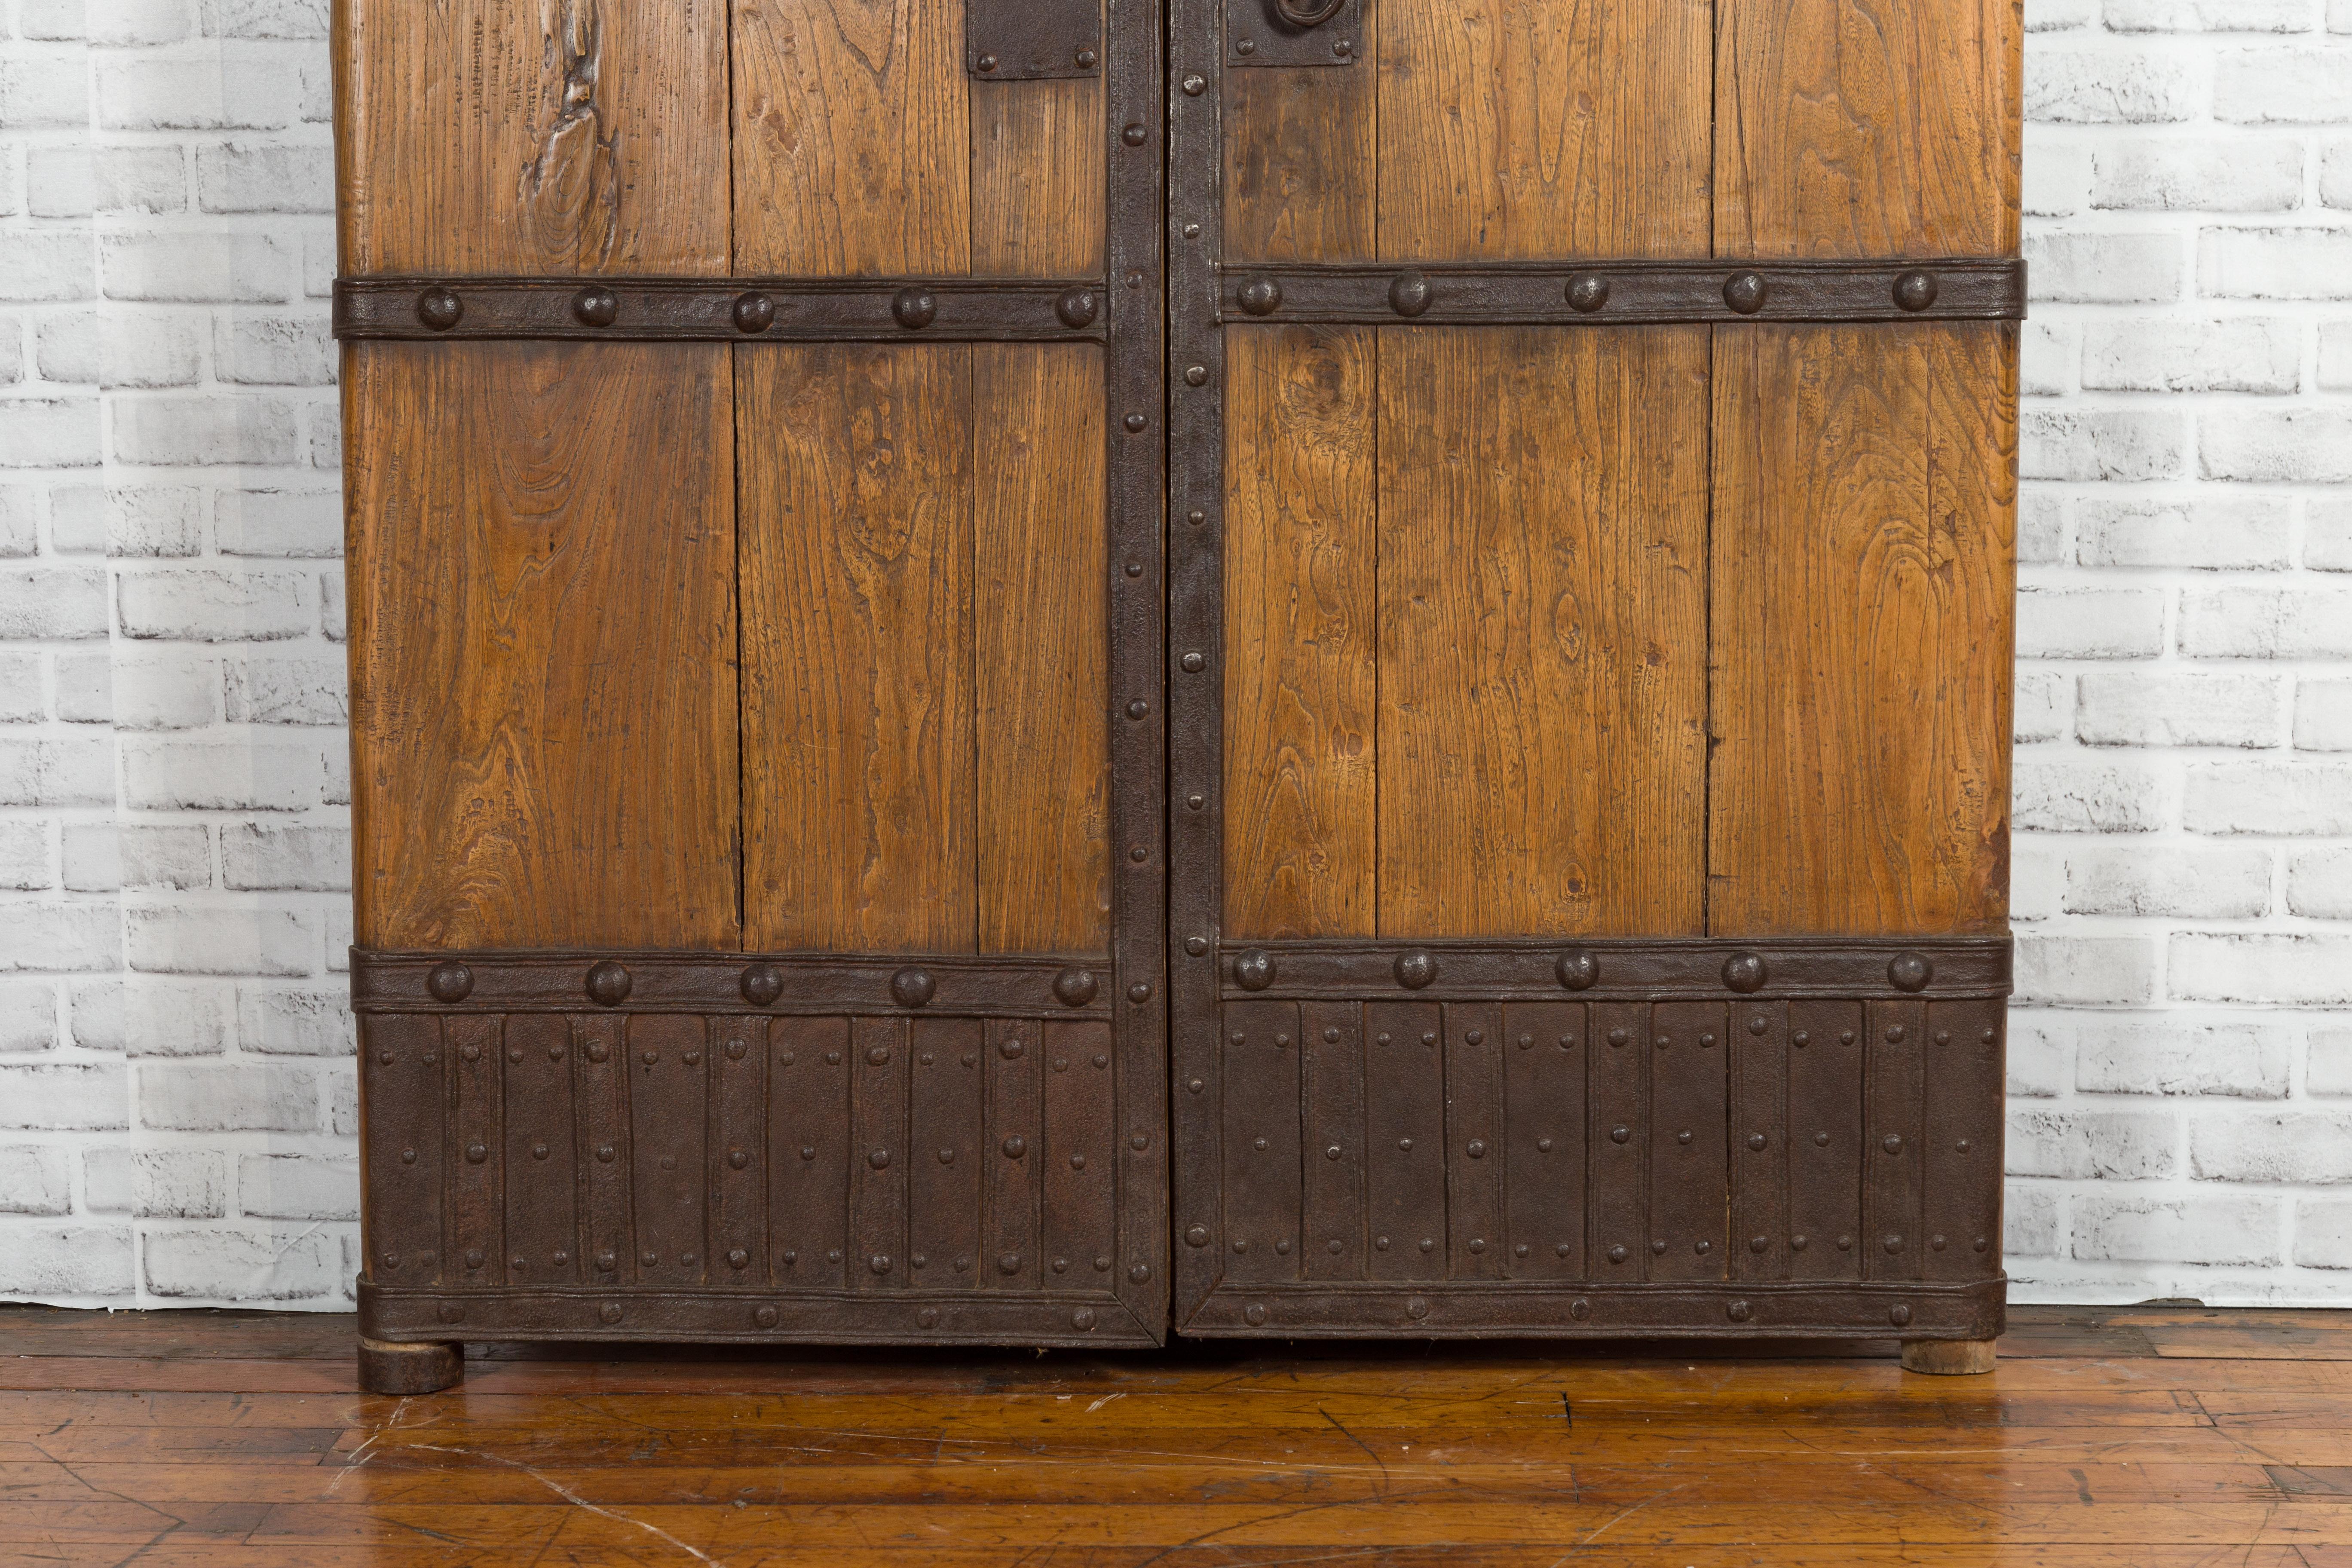 Pair of Chinese 19th Century Qing Dynasty Period Palace Doors with Iron Fittings For Sale 2